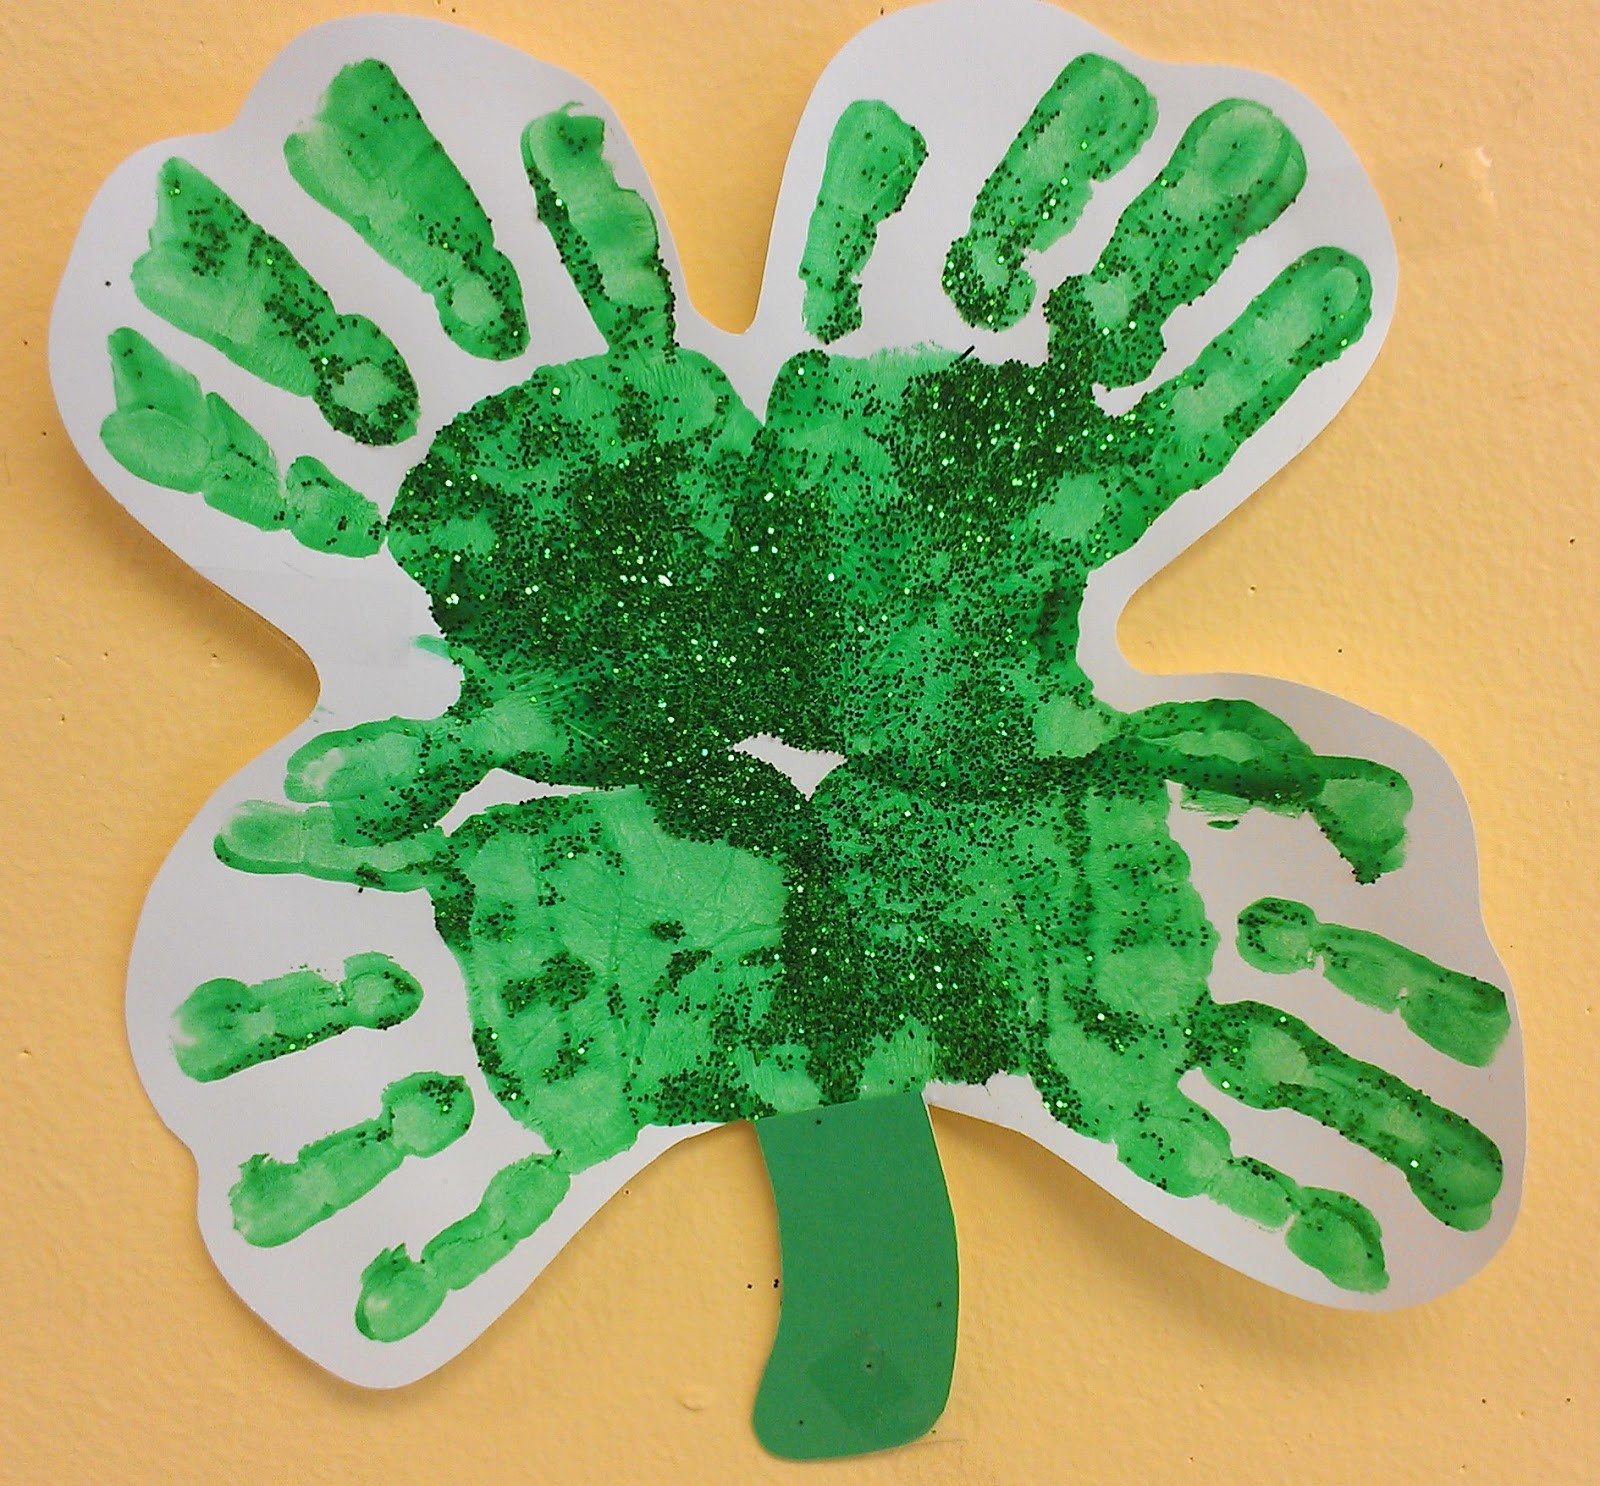 Kindergarten St Patrick Day Crafts
 Preschool Ideas For 2 Year Olds St Patrick s Day